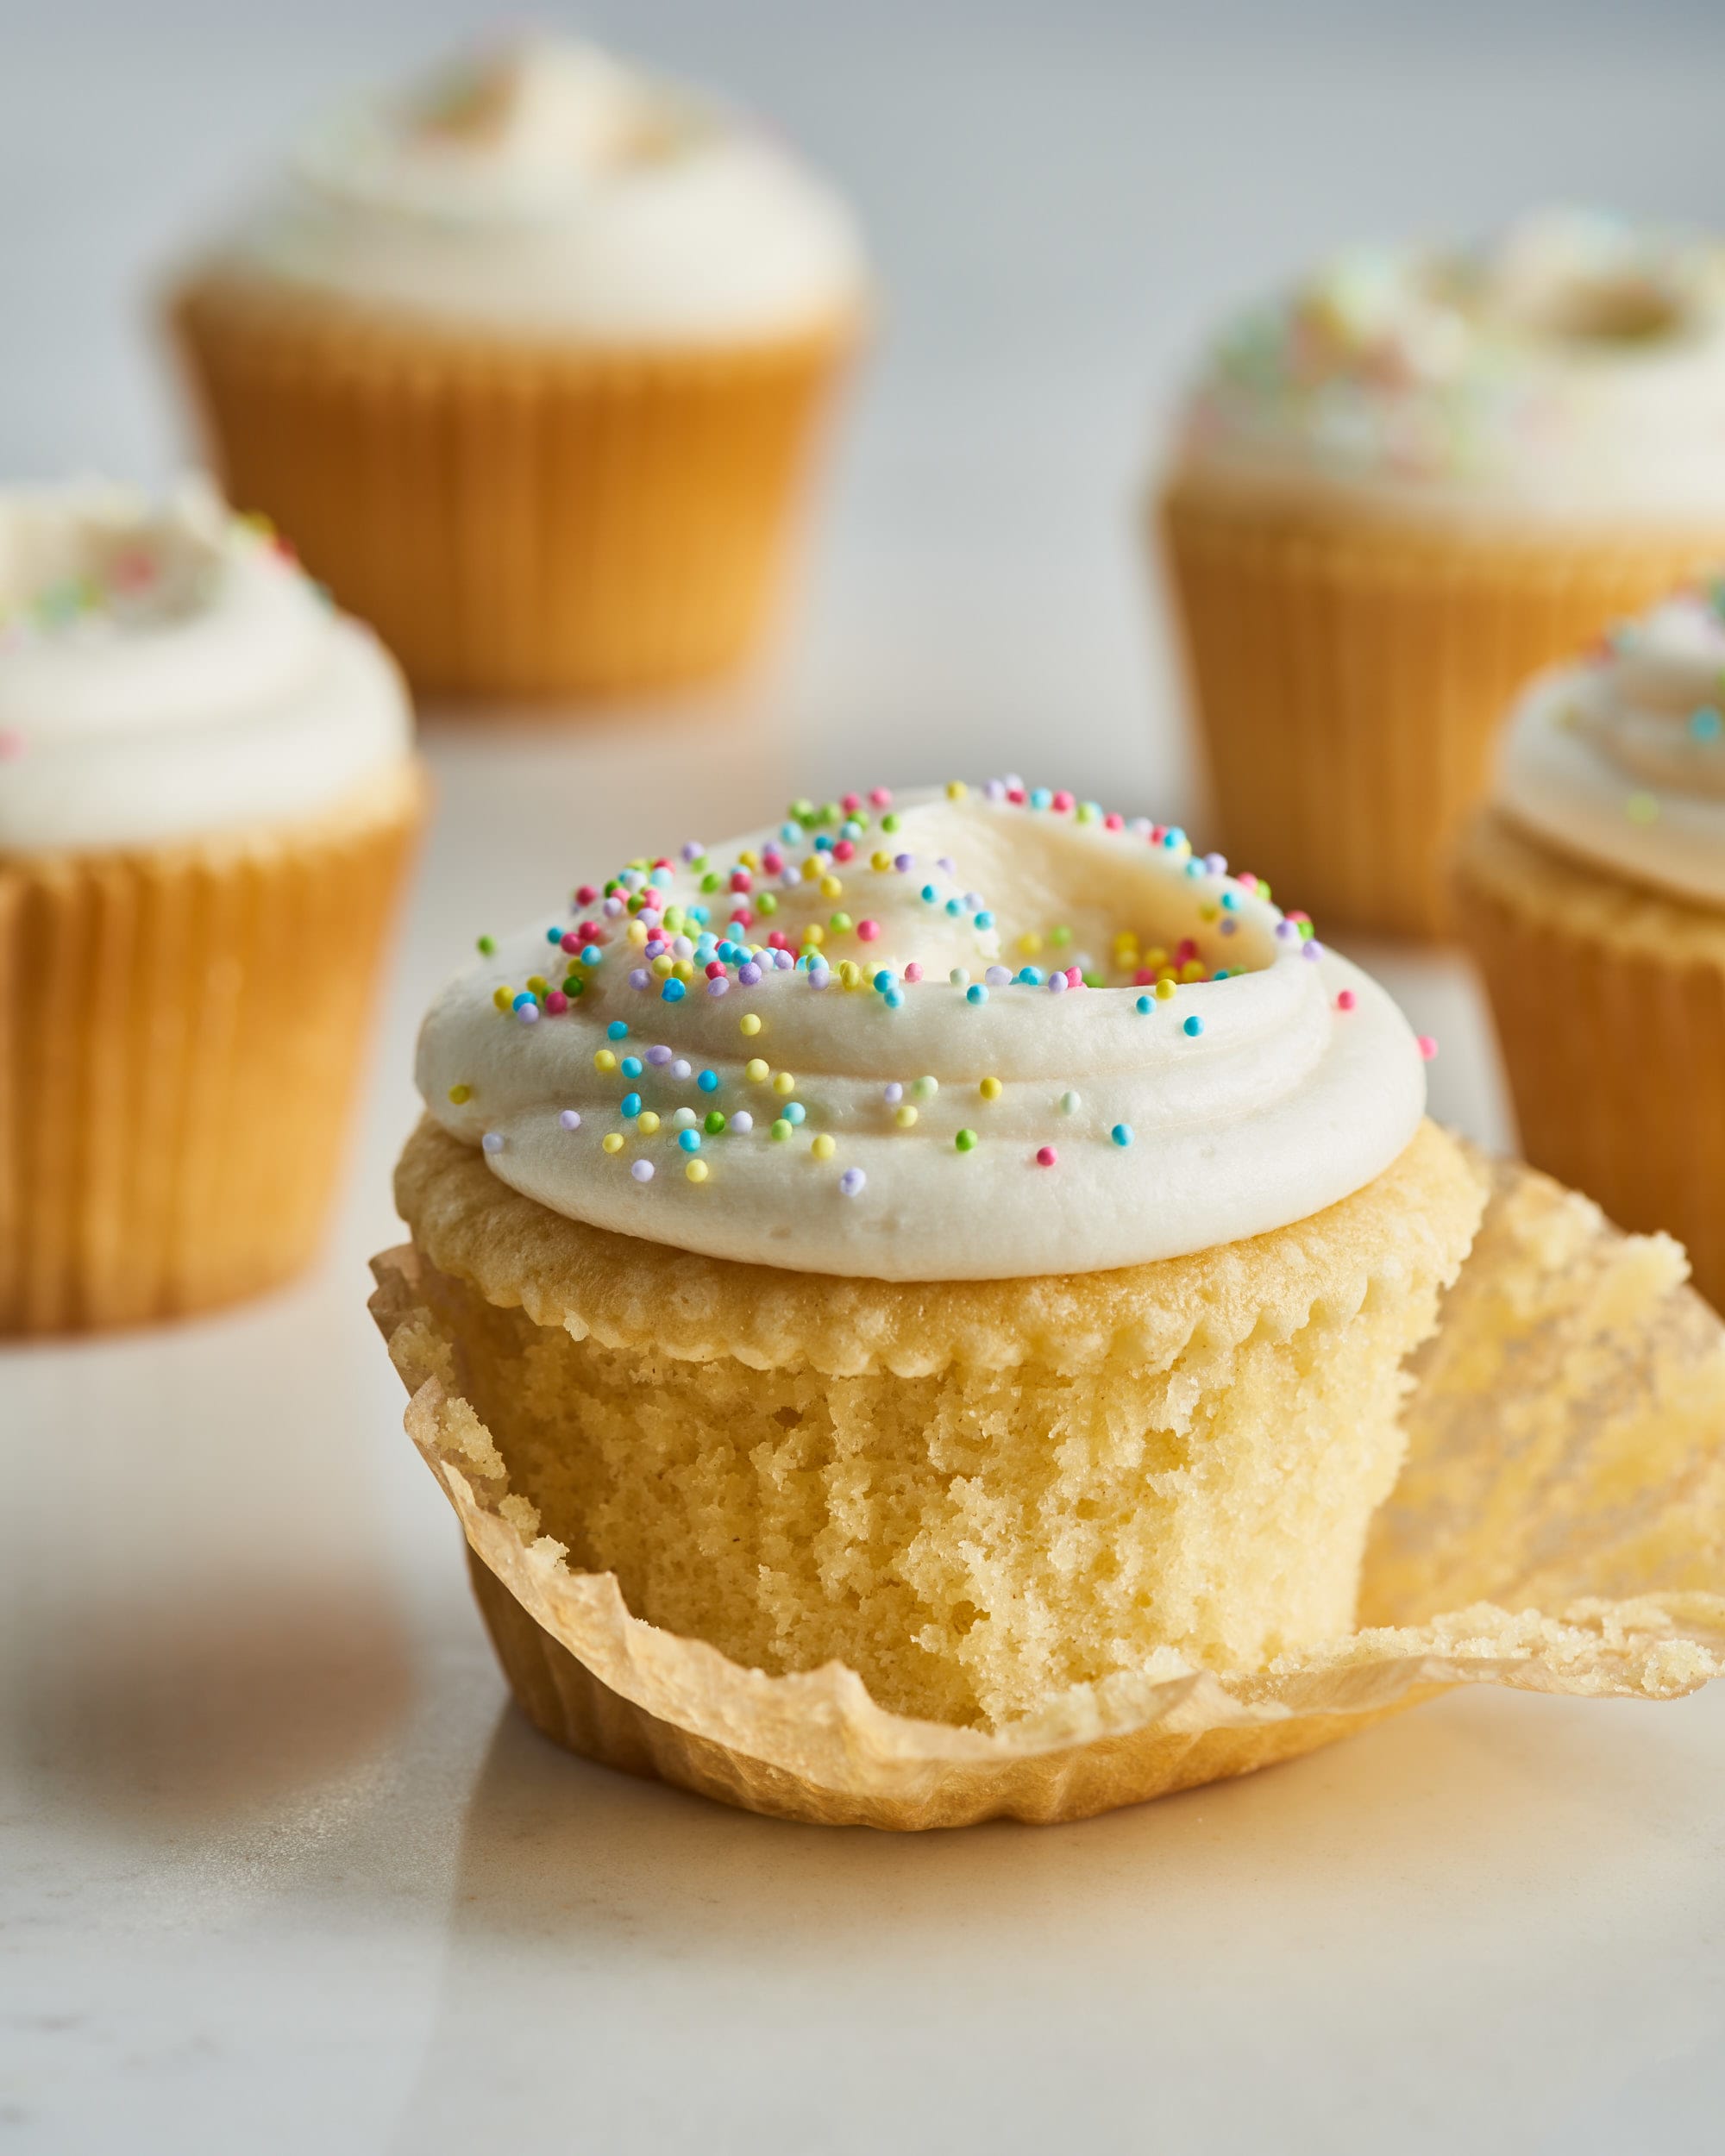 Vanilla Cupcakes (that actually stay moist)